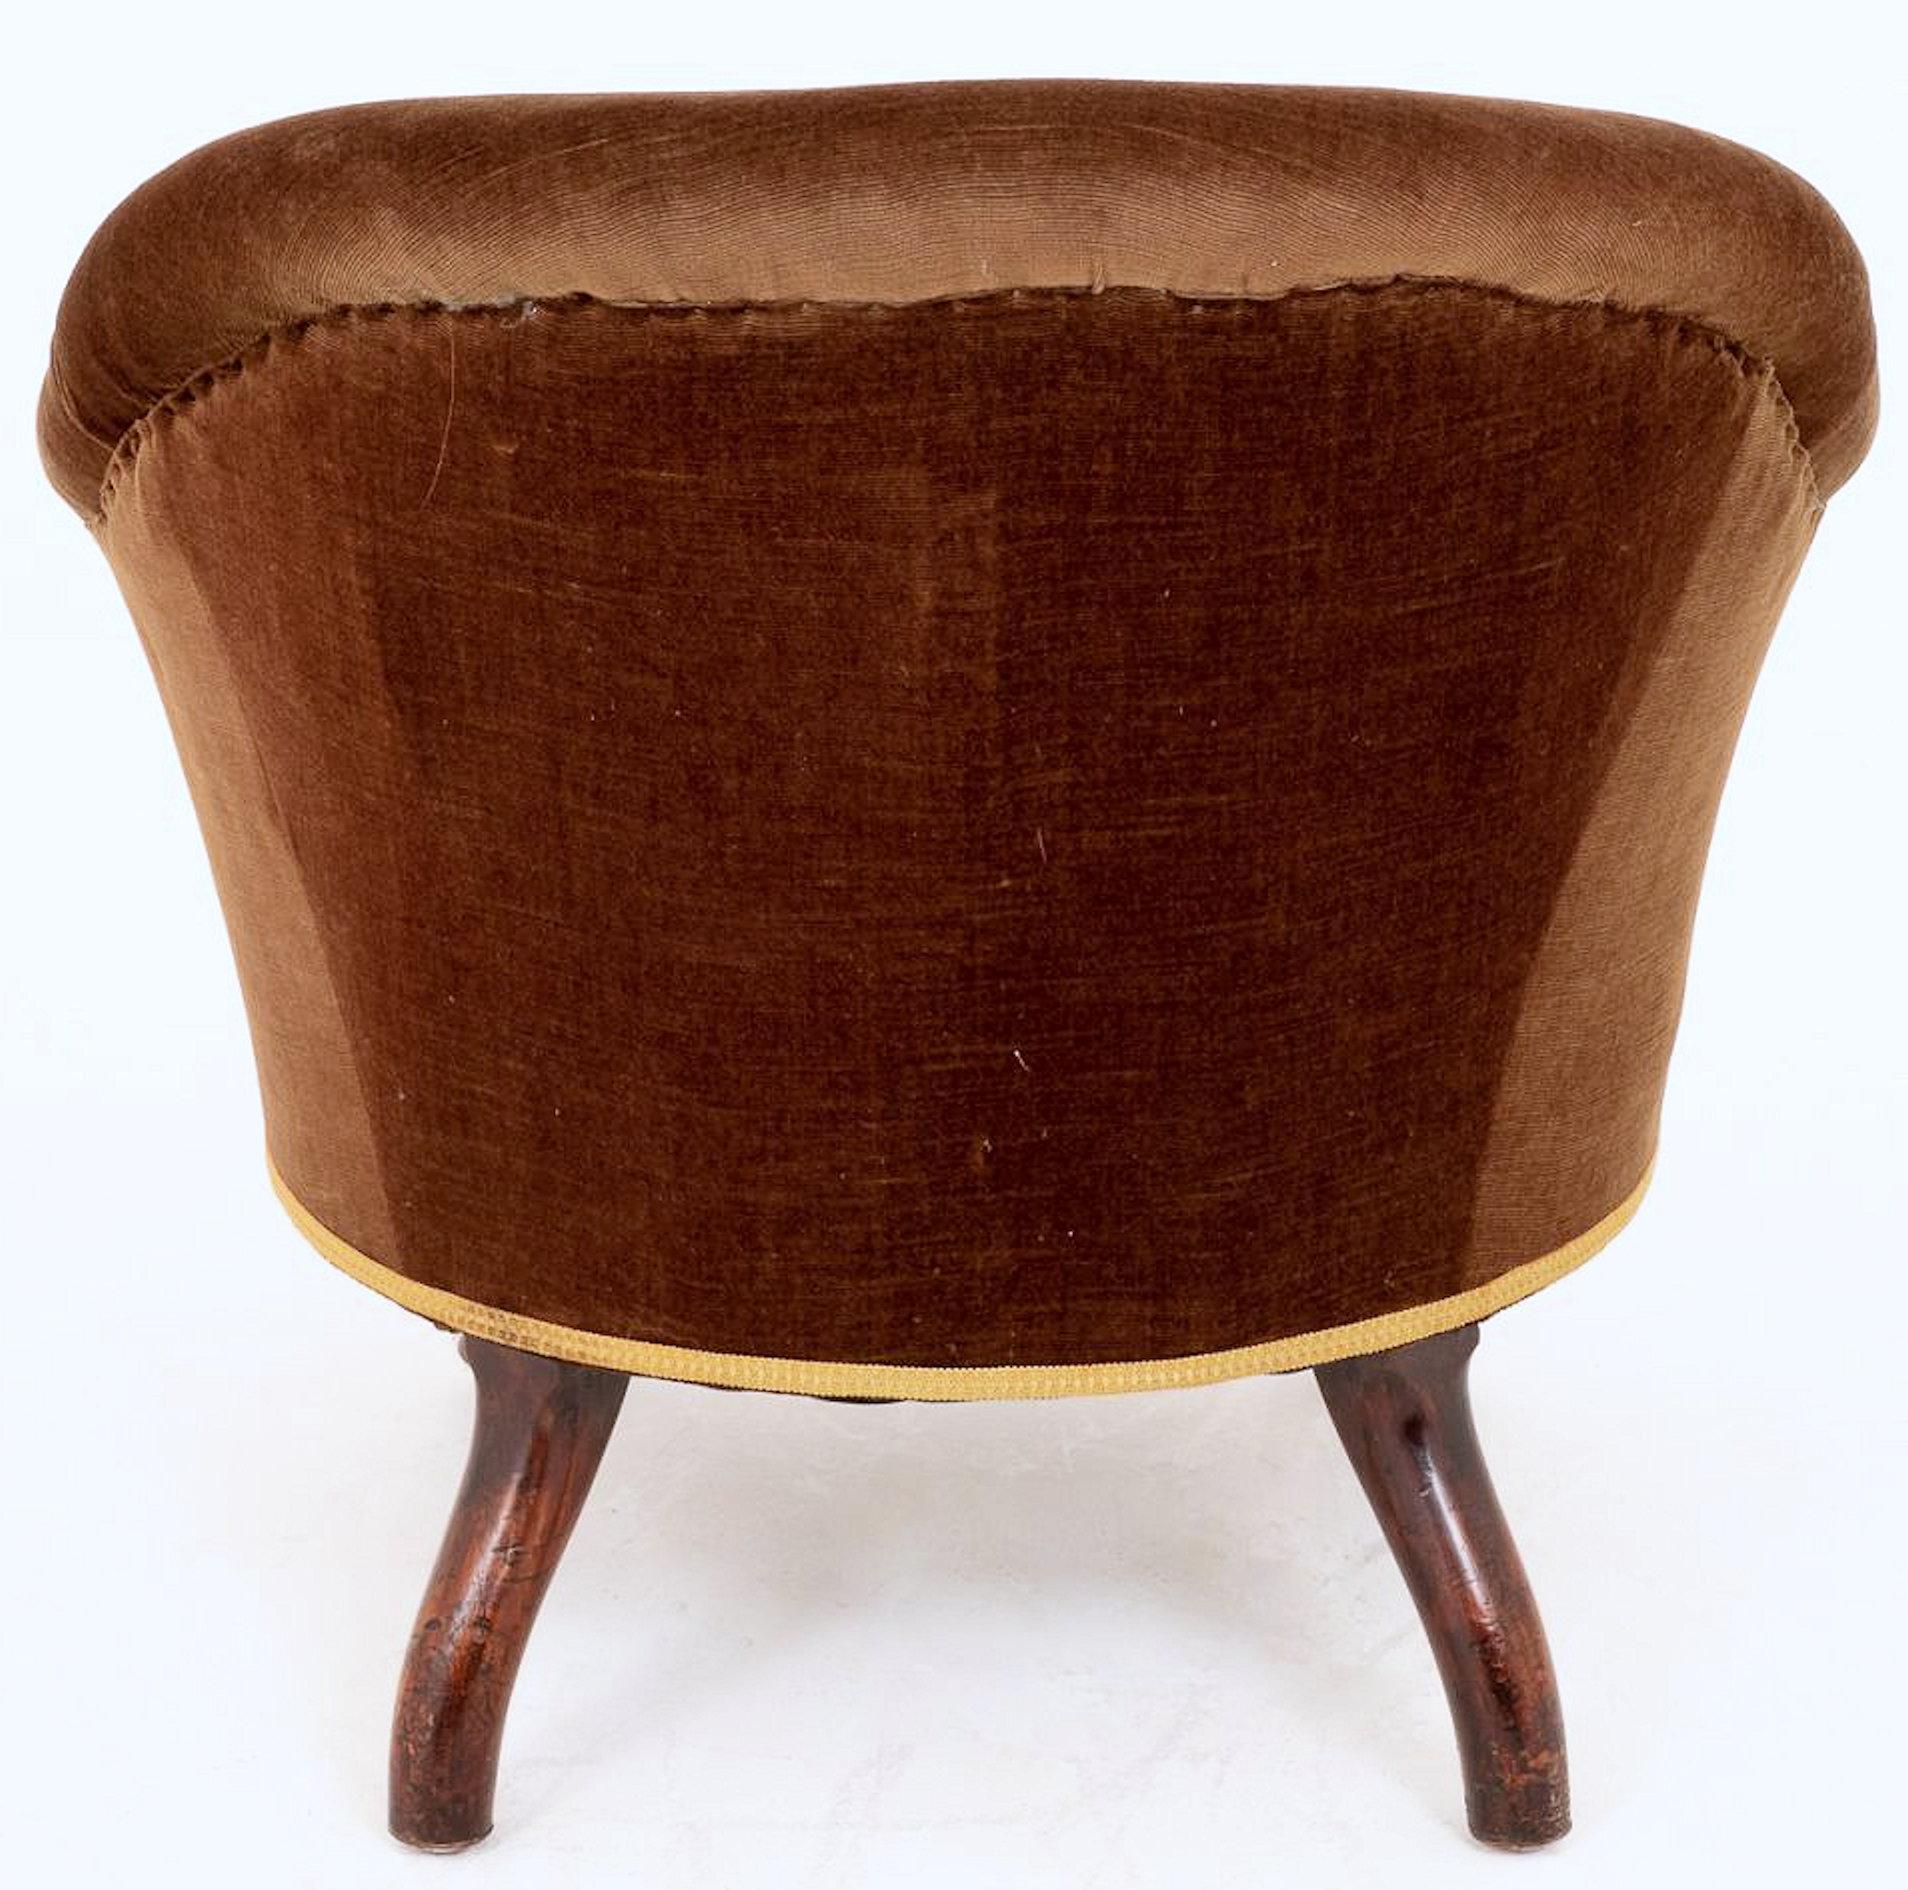 Upholstery 19th Century English Upholstered Tub Chair